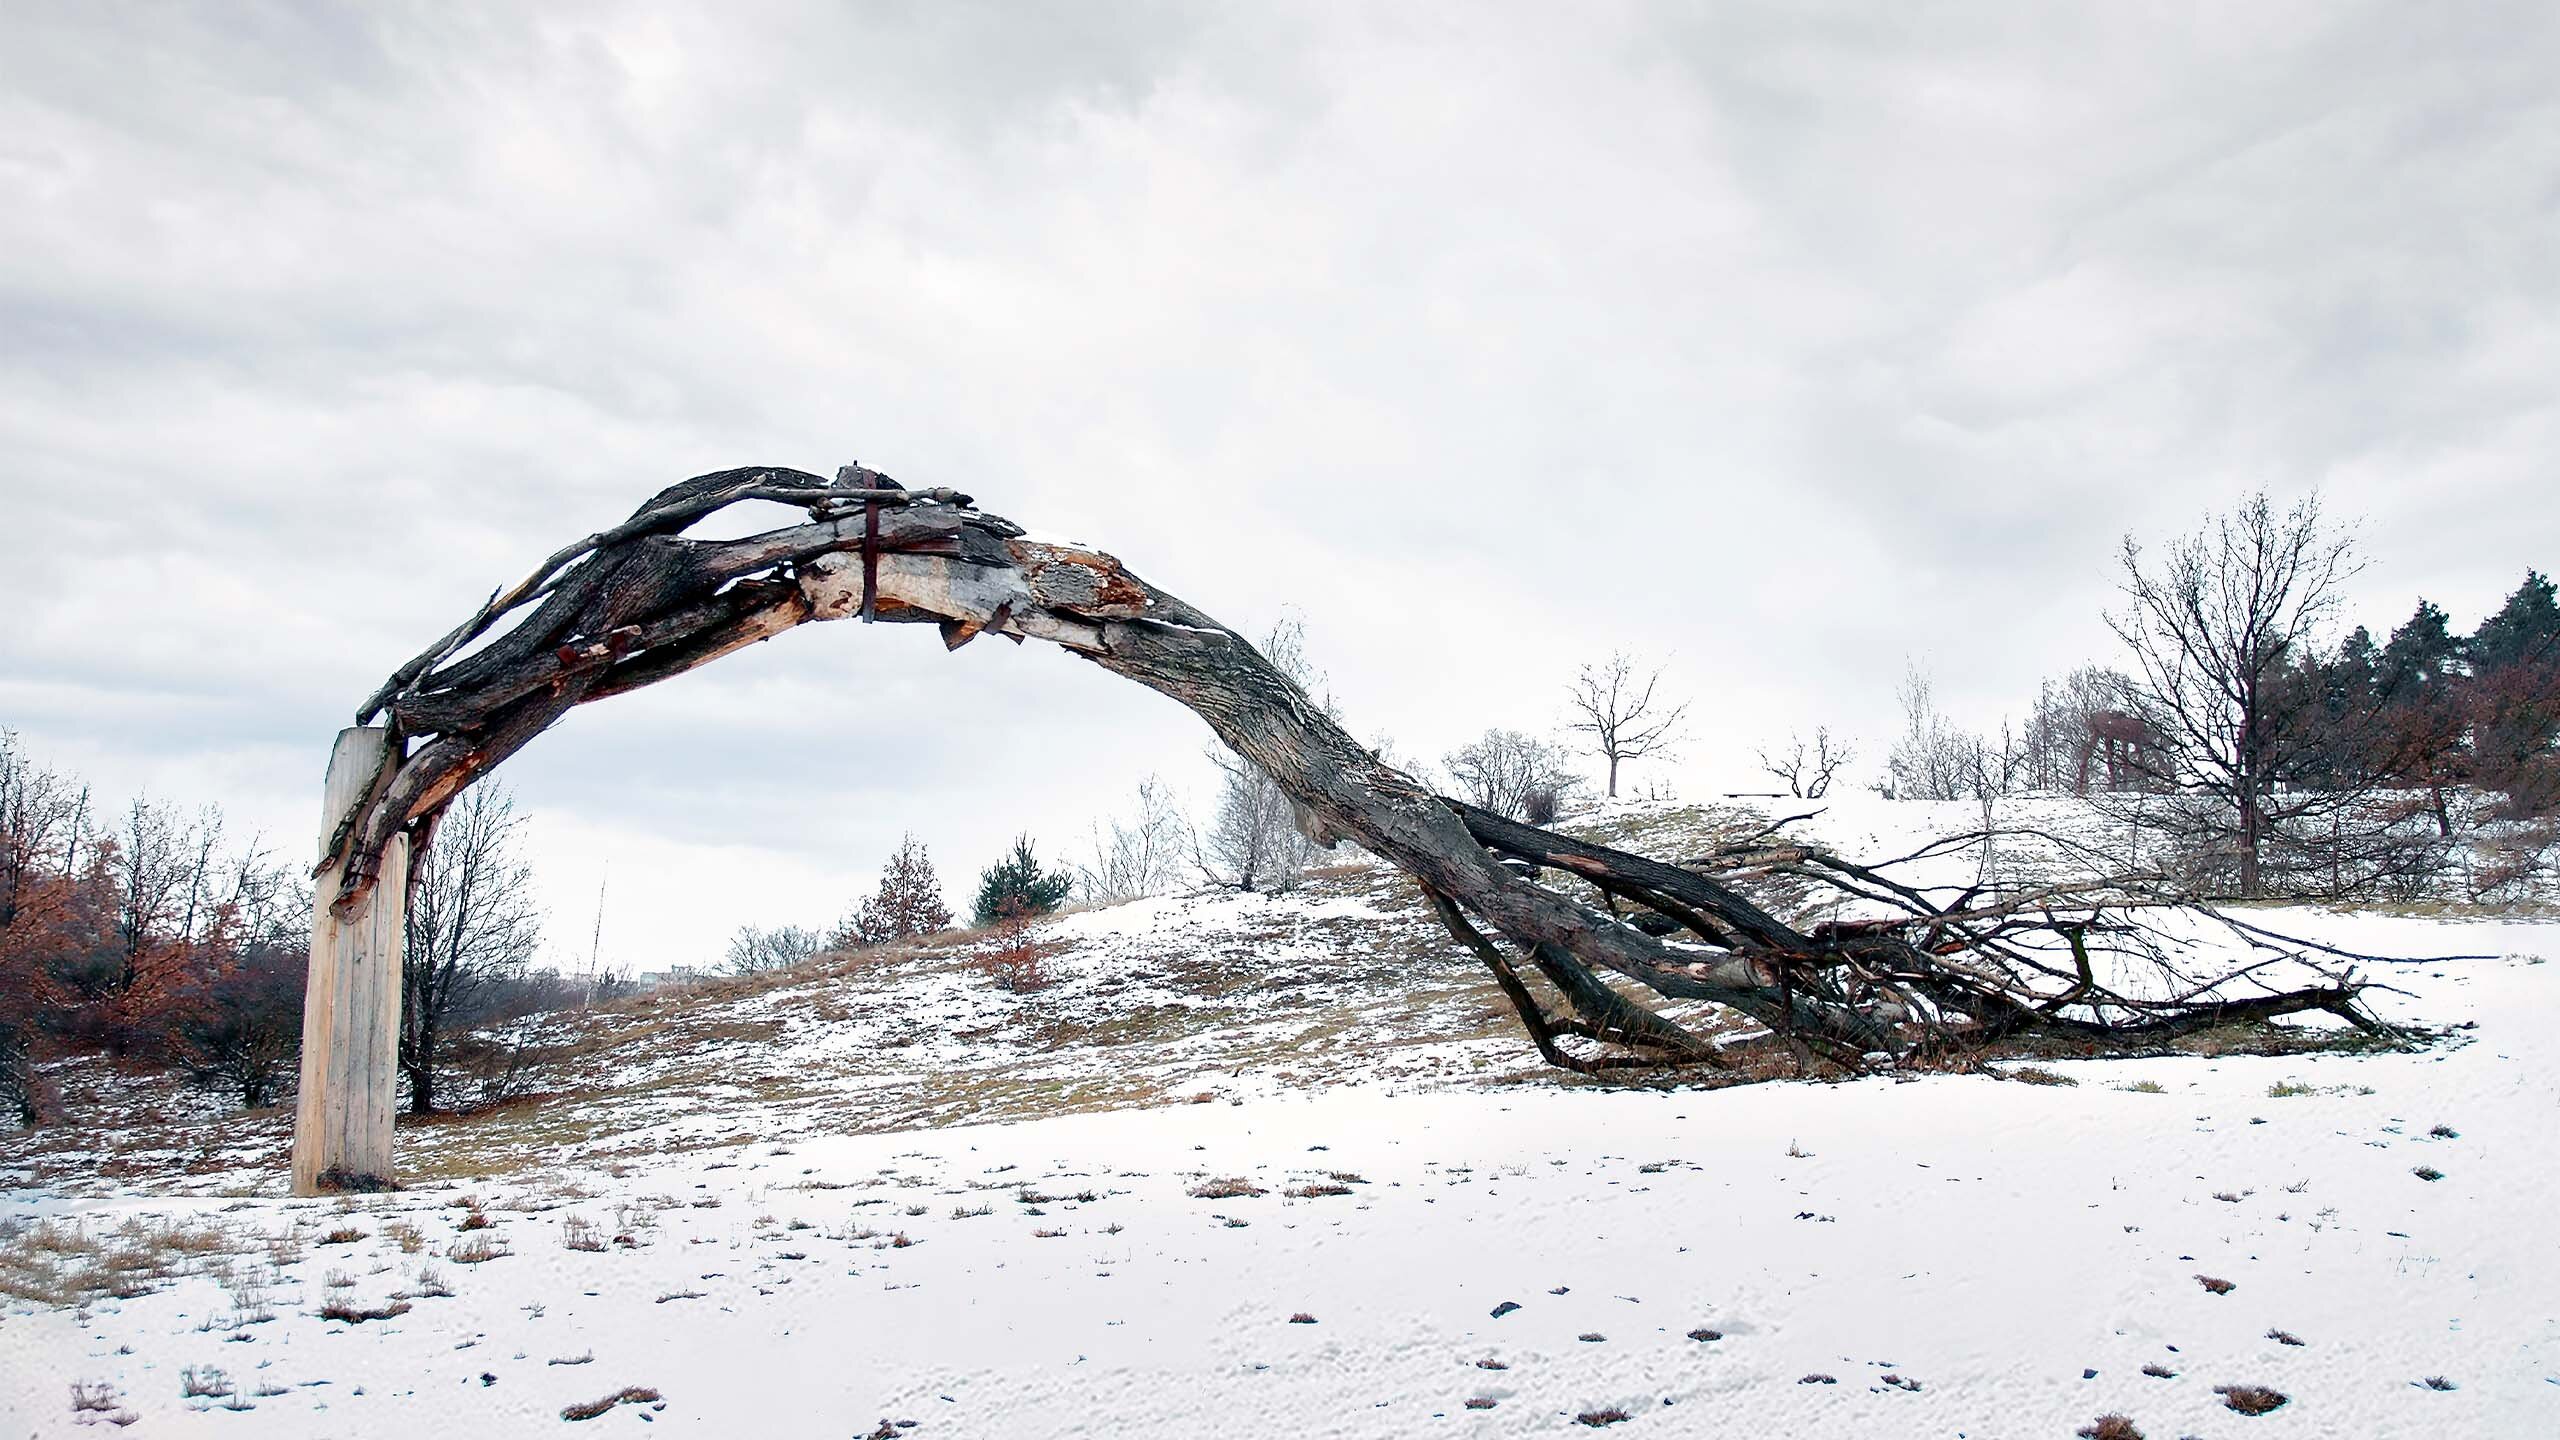 Monumental wooden sculpture: Withered tree amidst snowy slope. Artwork symbolizes human impact on nature's destruction